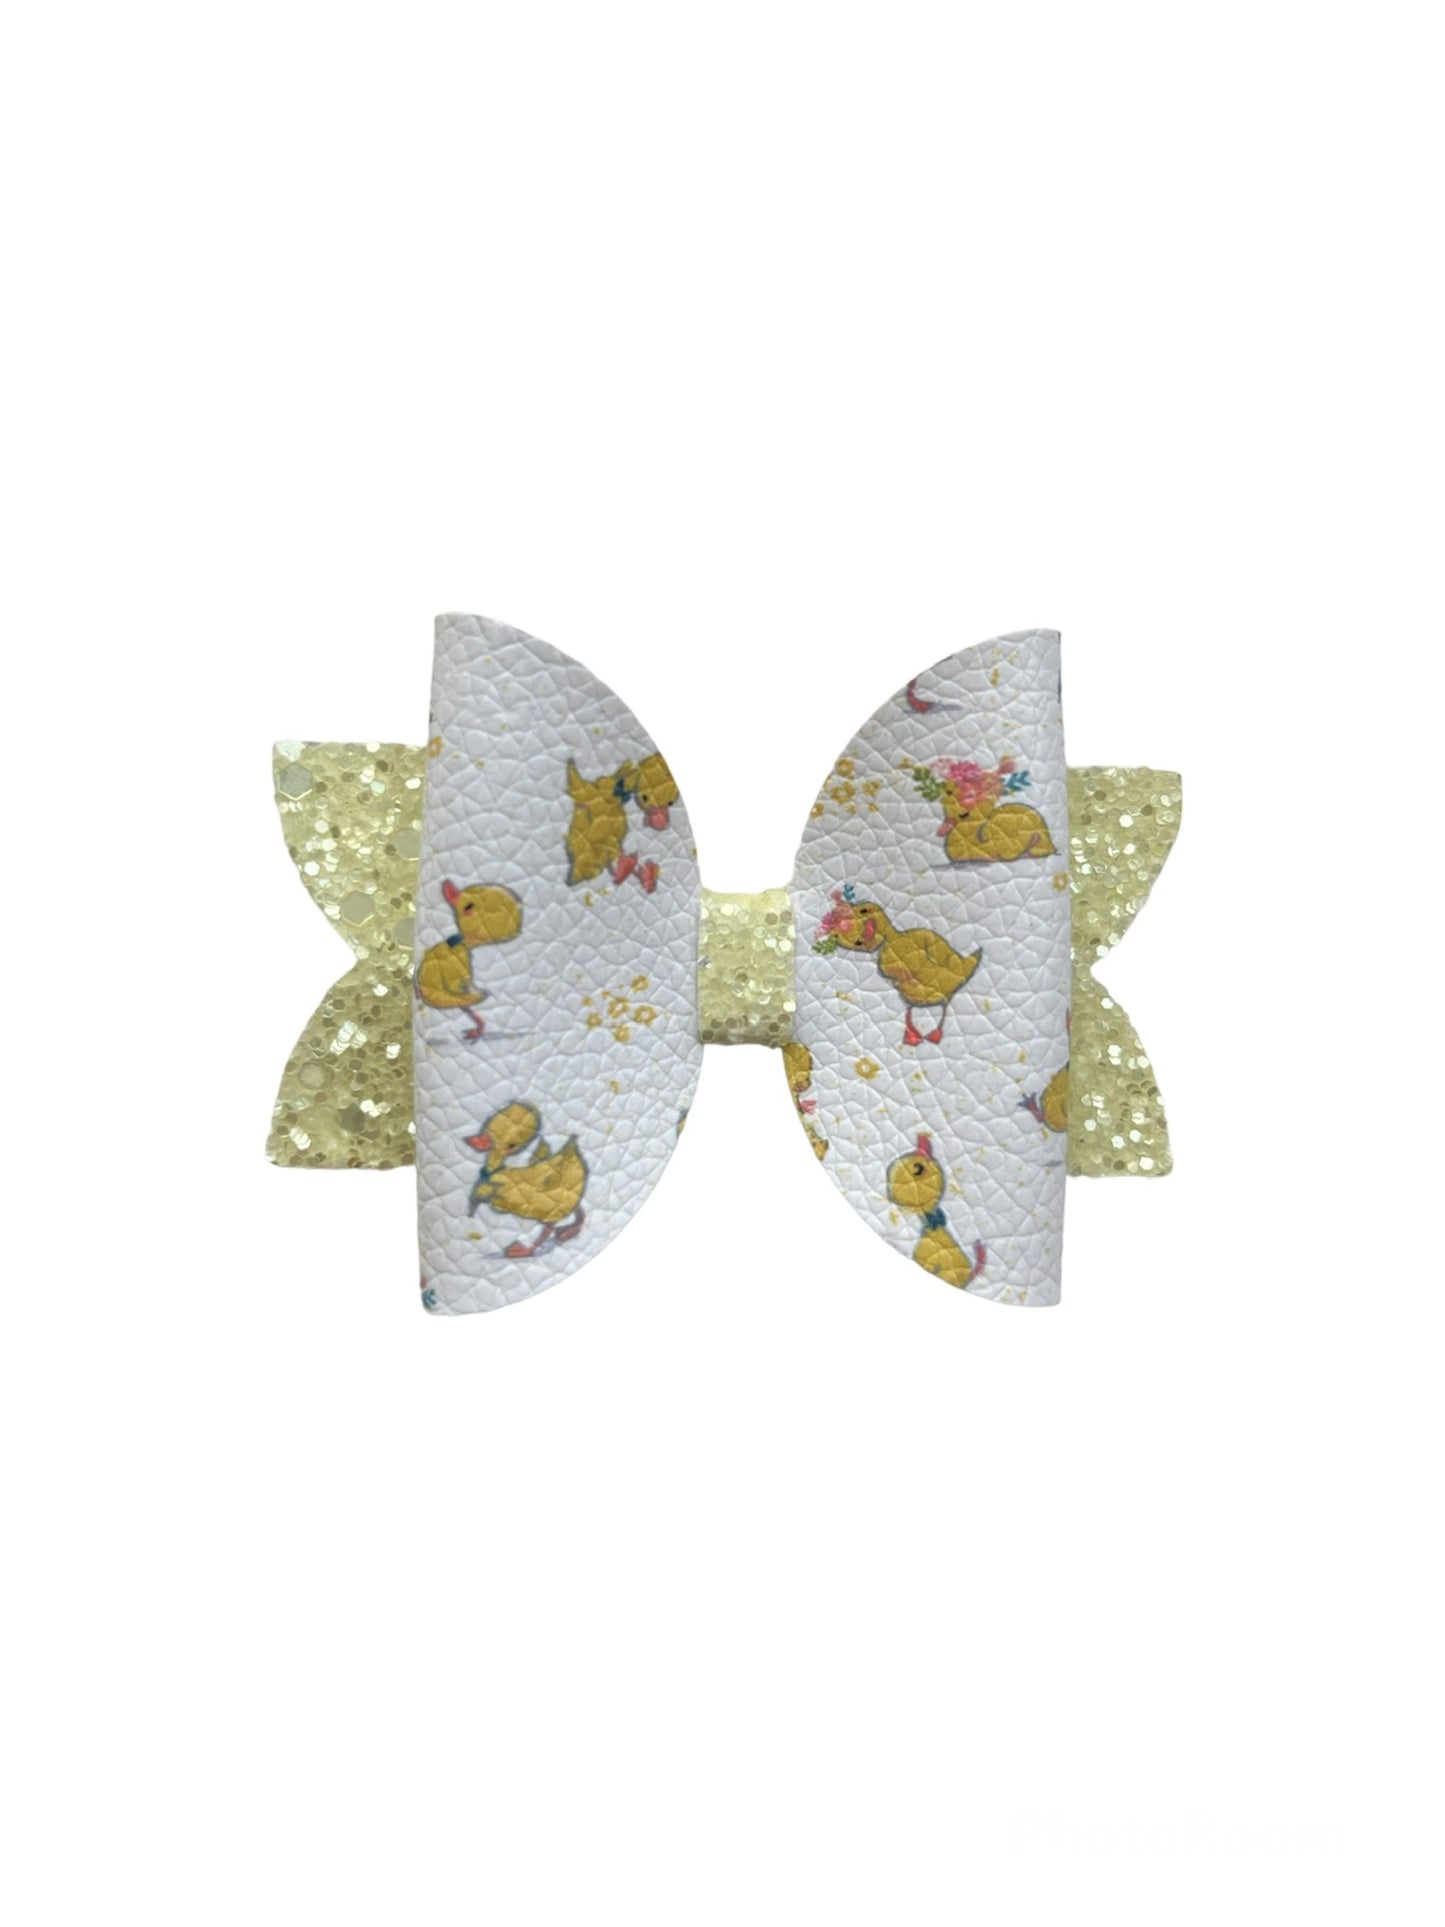 Ducky Easter Bow!